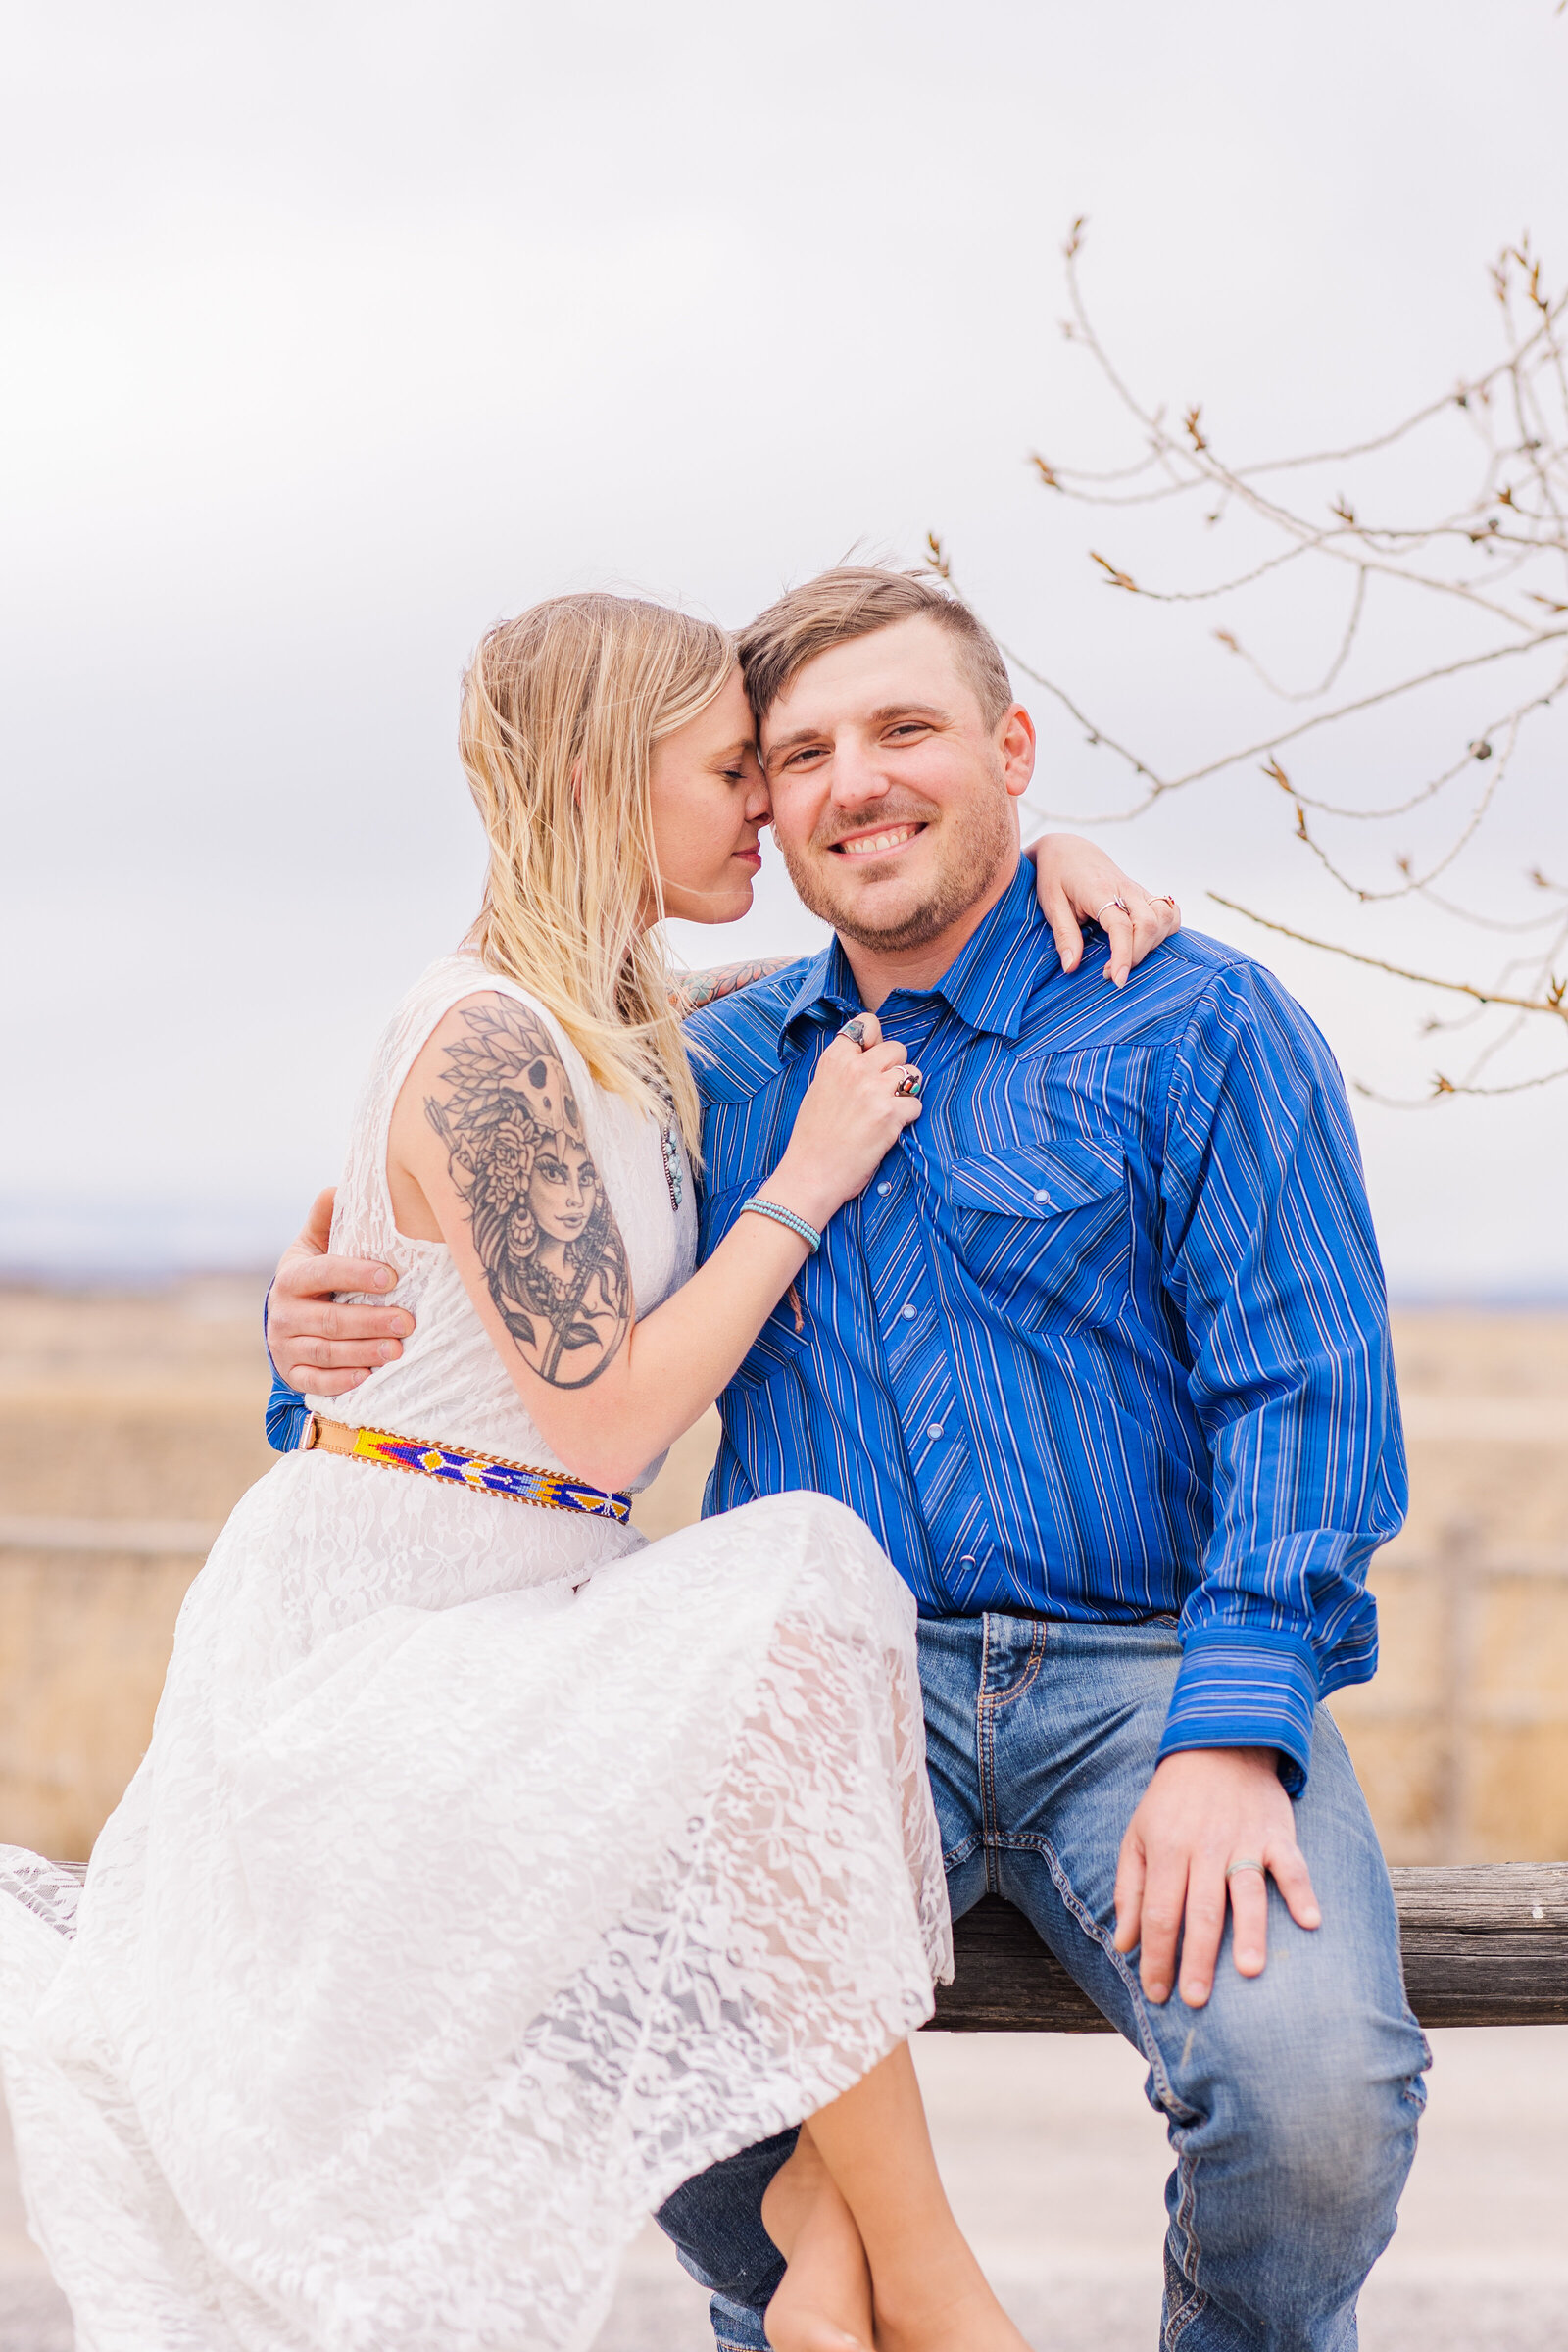 girl in lace white dress with fiancè in blue shirt and  jeans